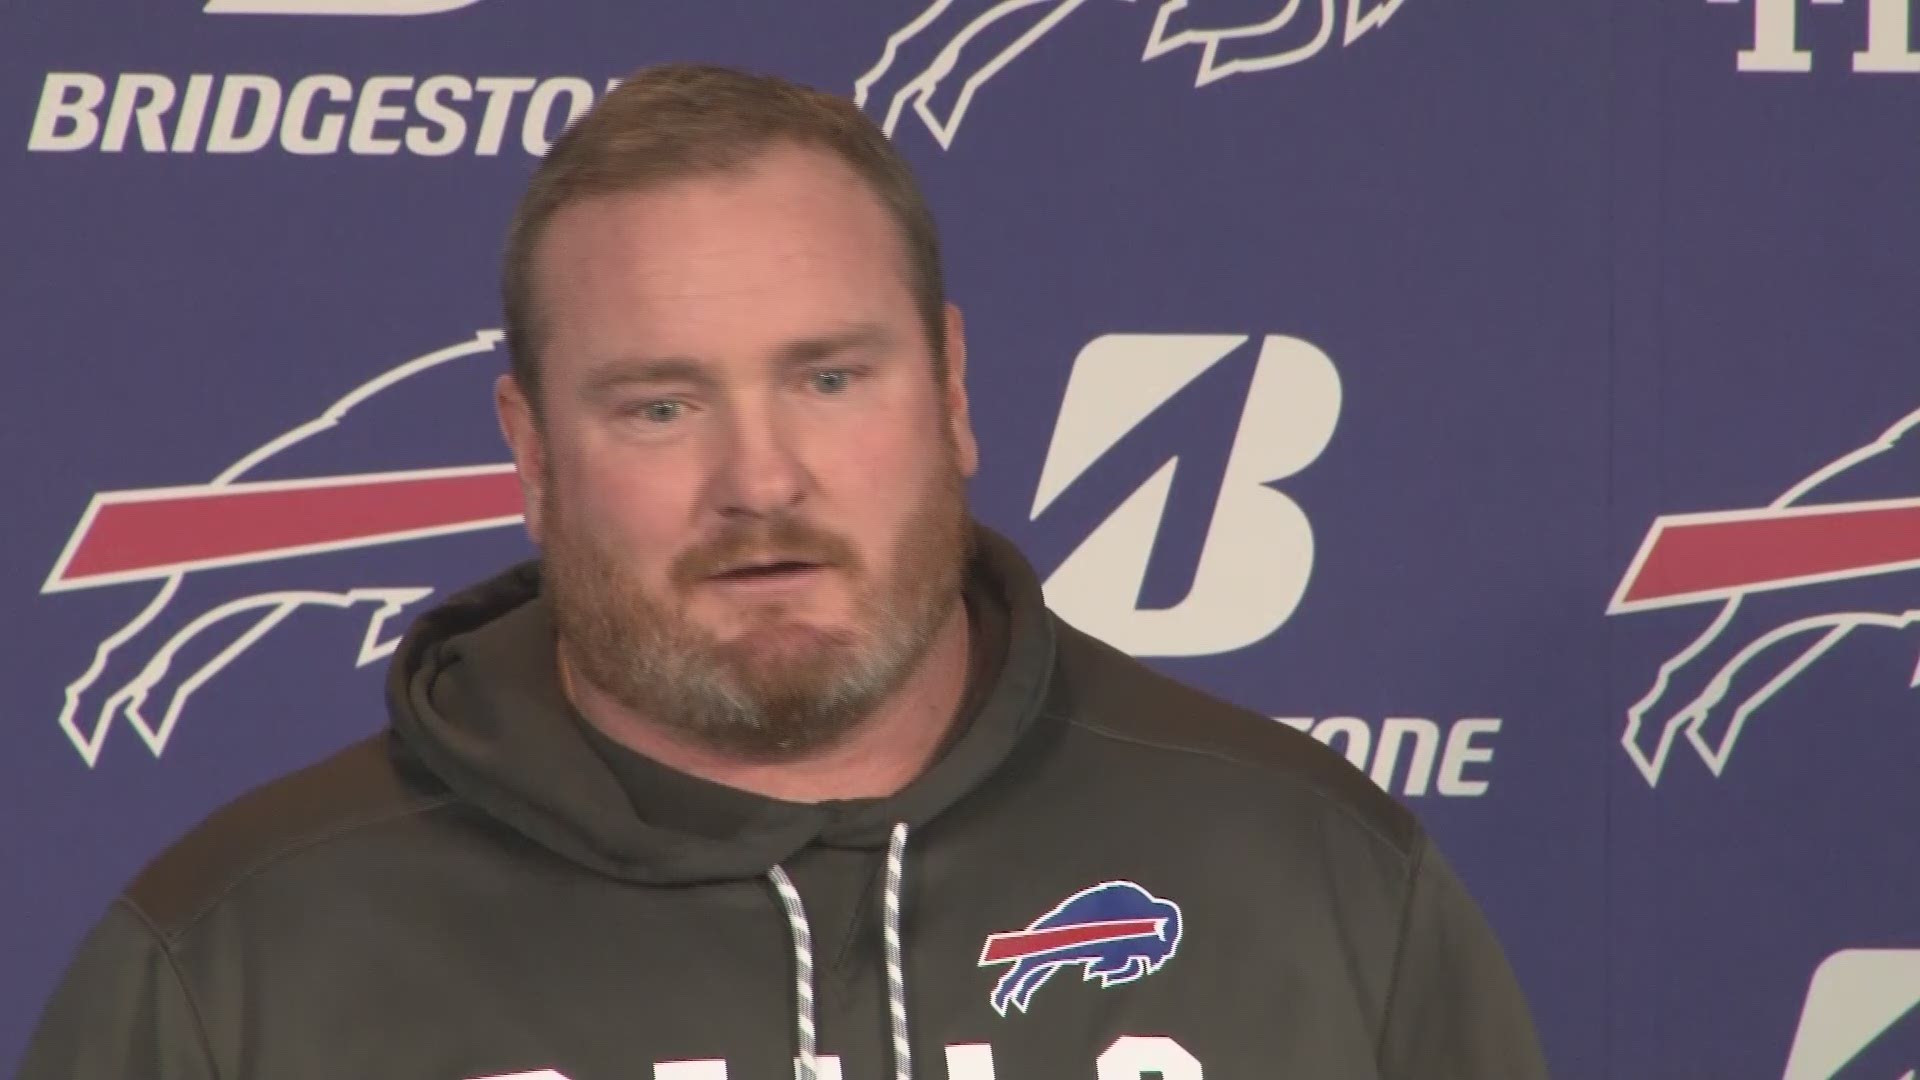 Kyle Williams is back for another season after signing a one-year deal with the Bills last month.